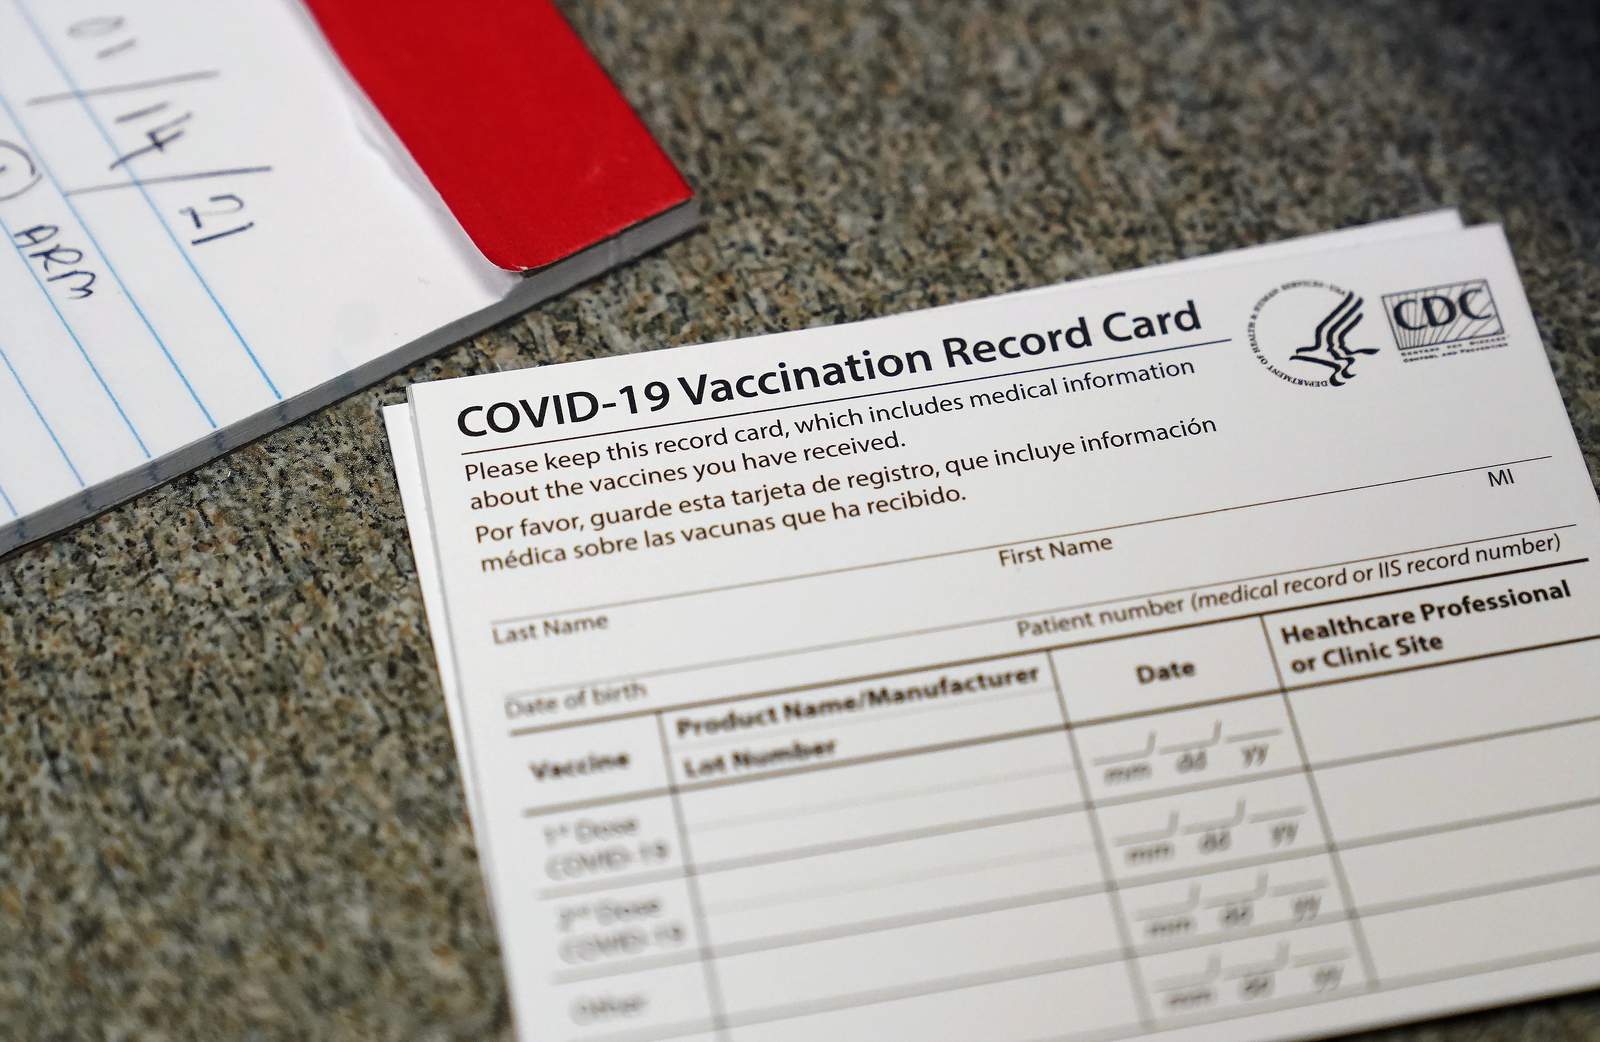 Don’t take a selfie with your COVID-19 vaccination card. Here’s why.